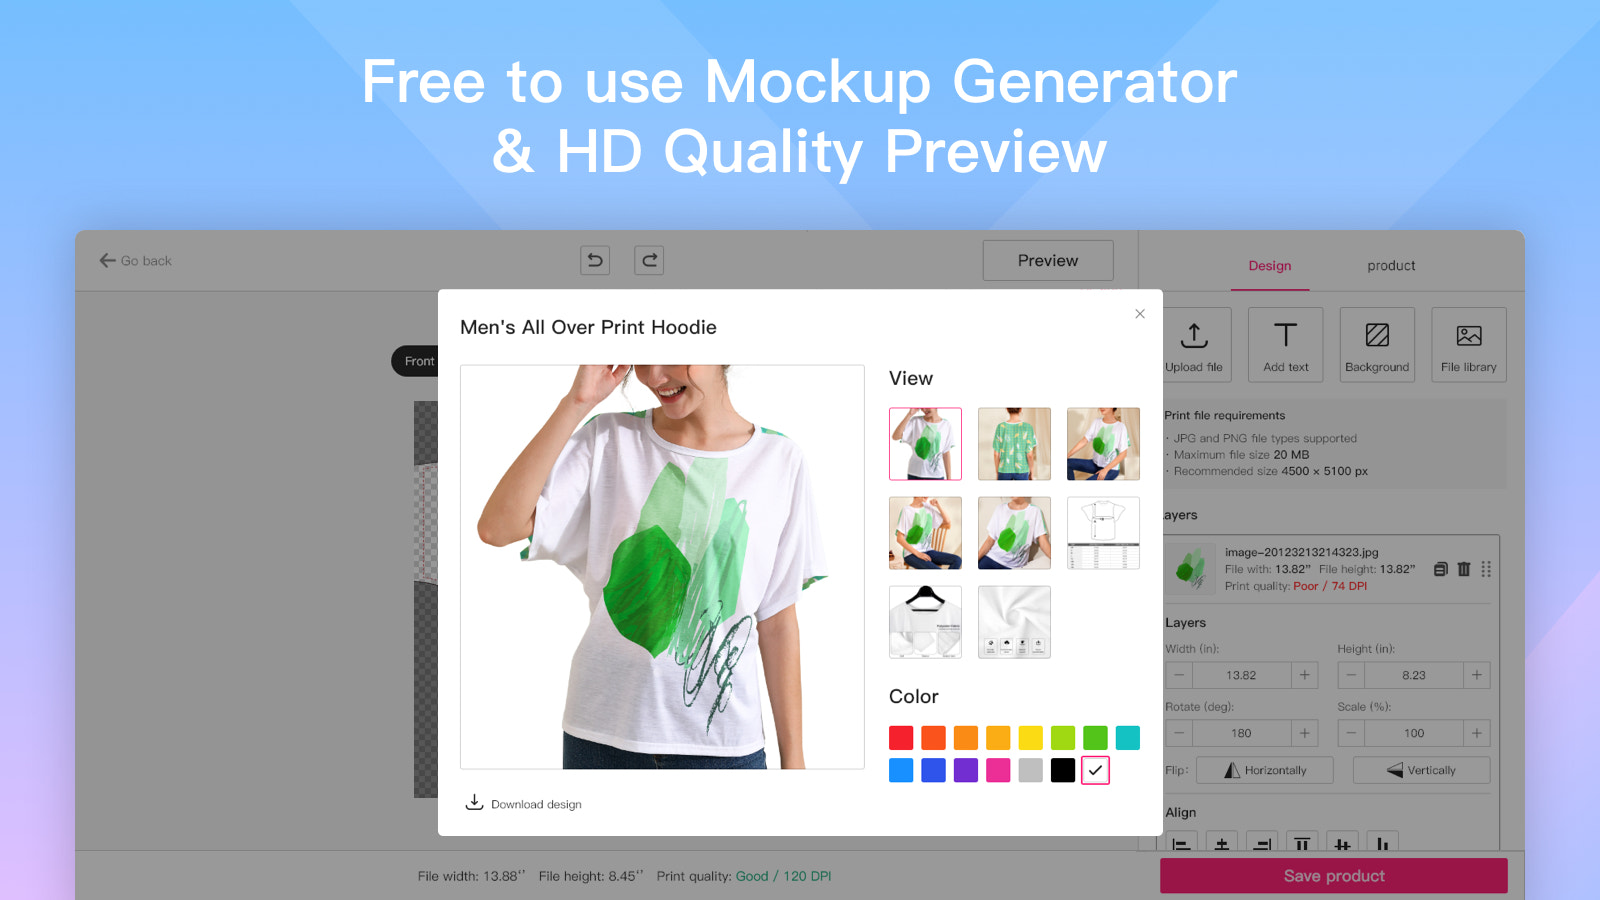 Free to use Mockup Generator & HD Quality Preview